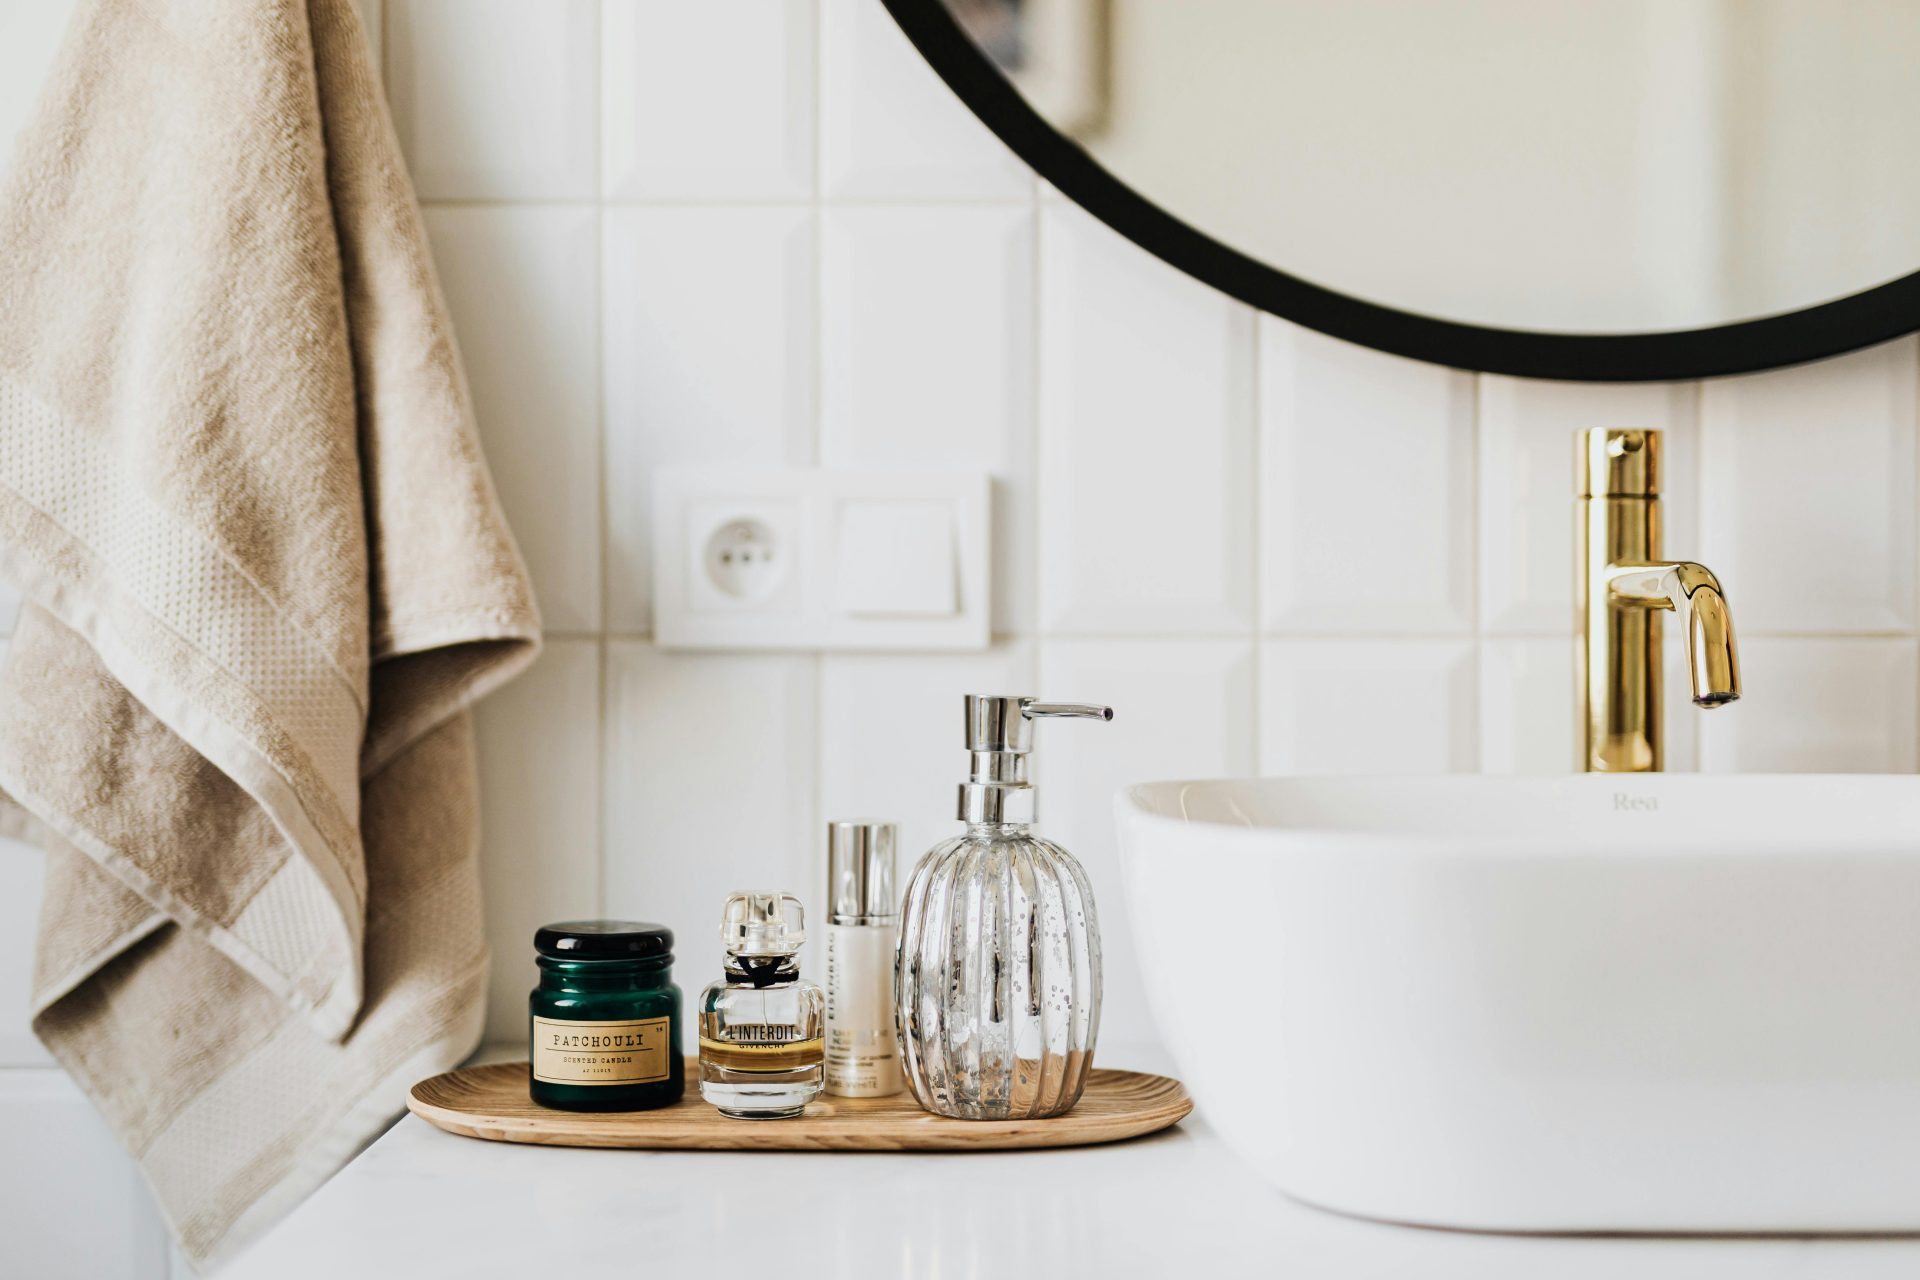 How to Match a Sink Style to Your Bathroom Decor